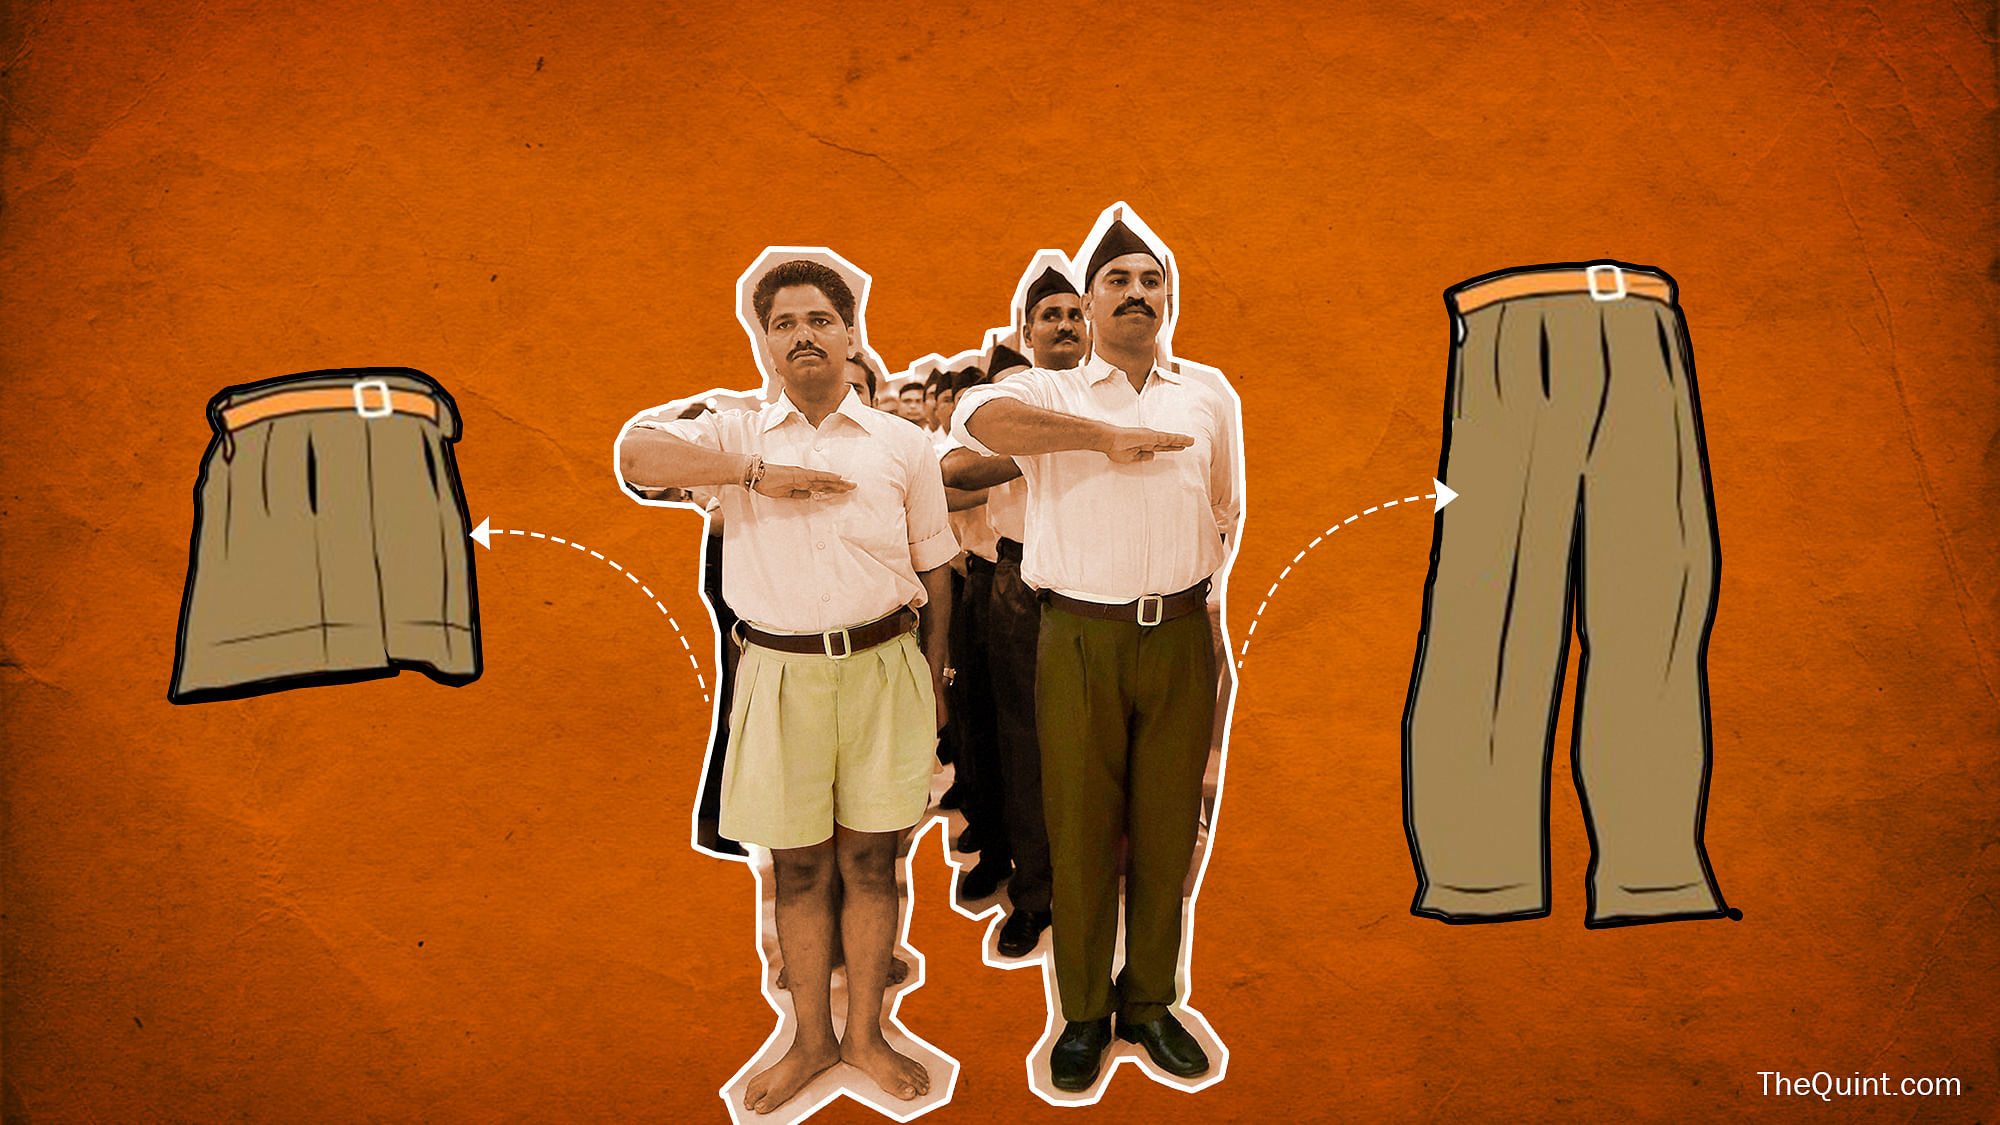 RSS to adopt trousers over the traditional Khaki knickers  India Today